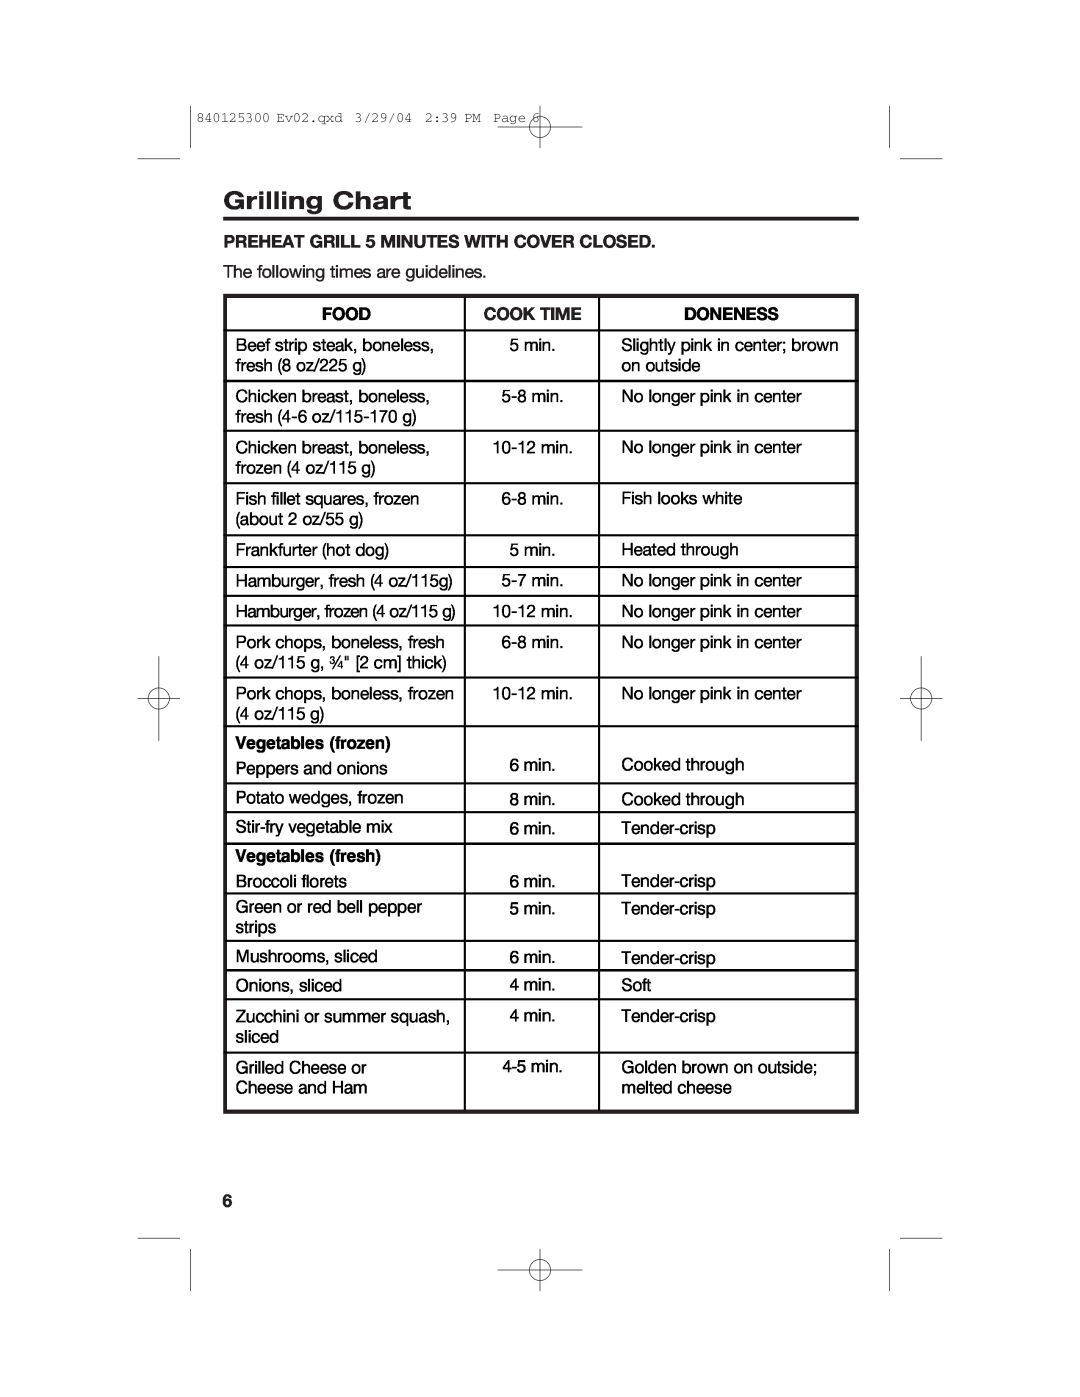 Hamilton Beach 25295 manual Grilling Chart, PREHEAT GRILL 5 MINUTES WITH COVER CLOSED, Food, Cook Time, Doneness 